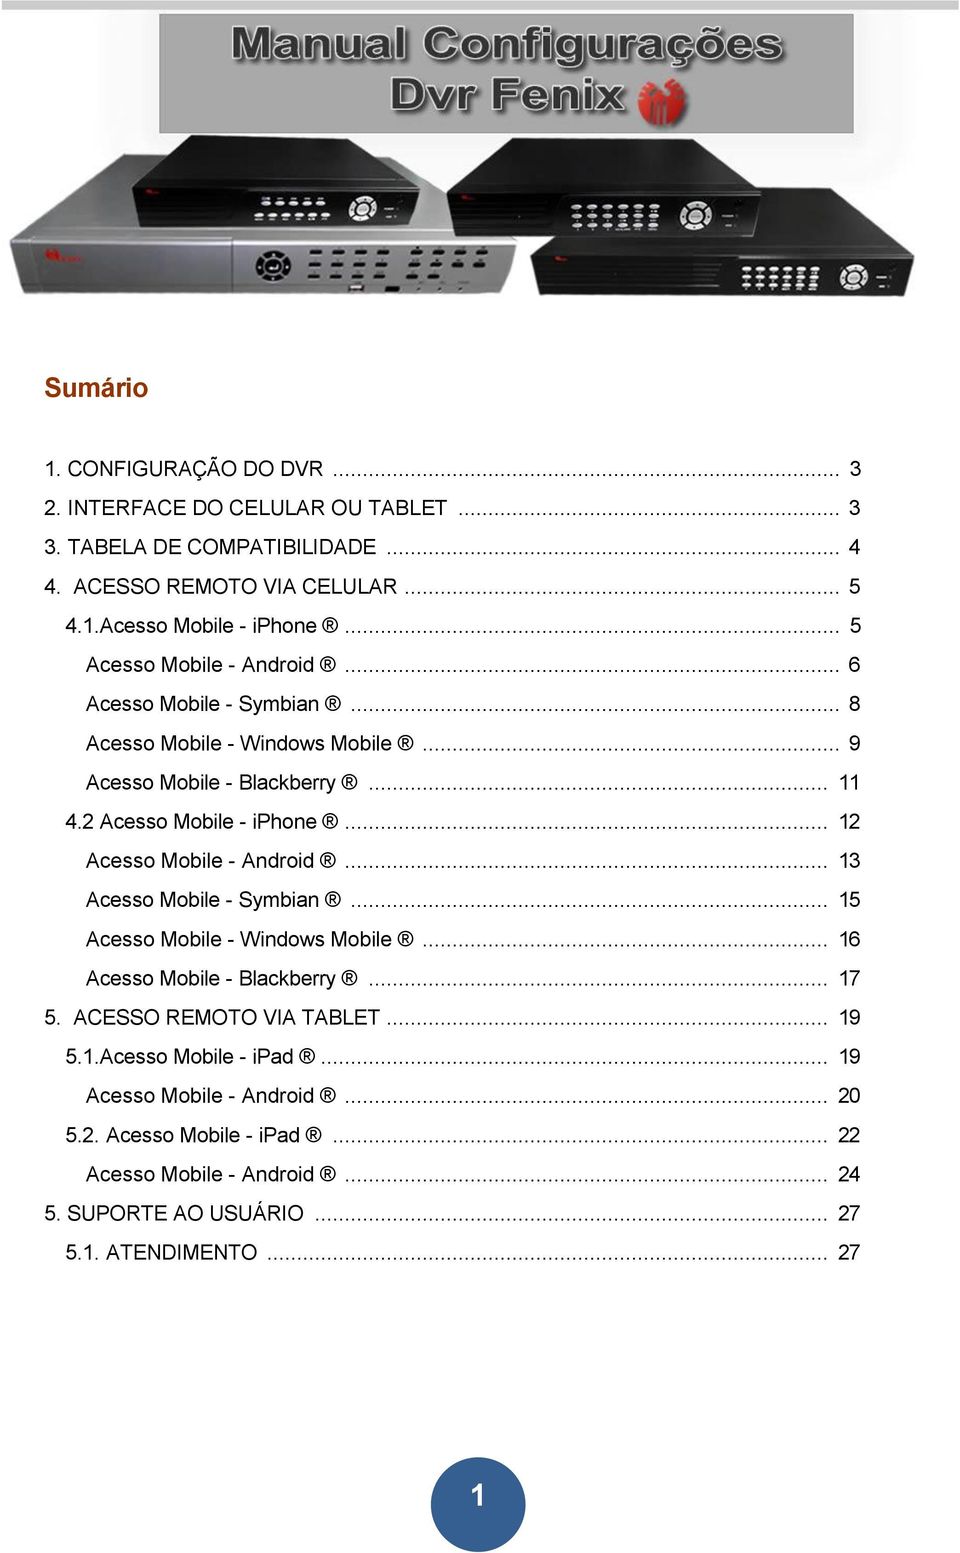 .. 12 Acesso Mobile - Android... 13 Acesso Mobile - Symbian... 15 Acesso Mobile - Windows Mobile... 16 Acesso Mobile - Blackberry... 17 5. ACESSO REMOTO VIA TABLET.